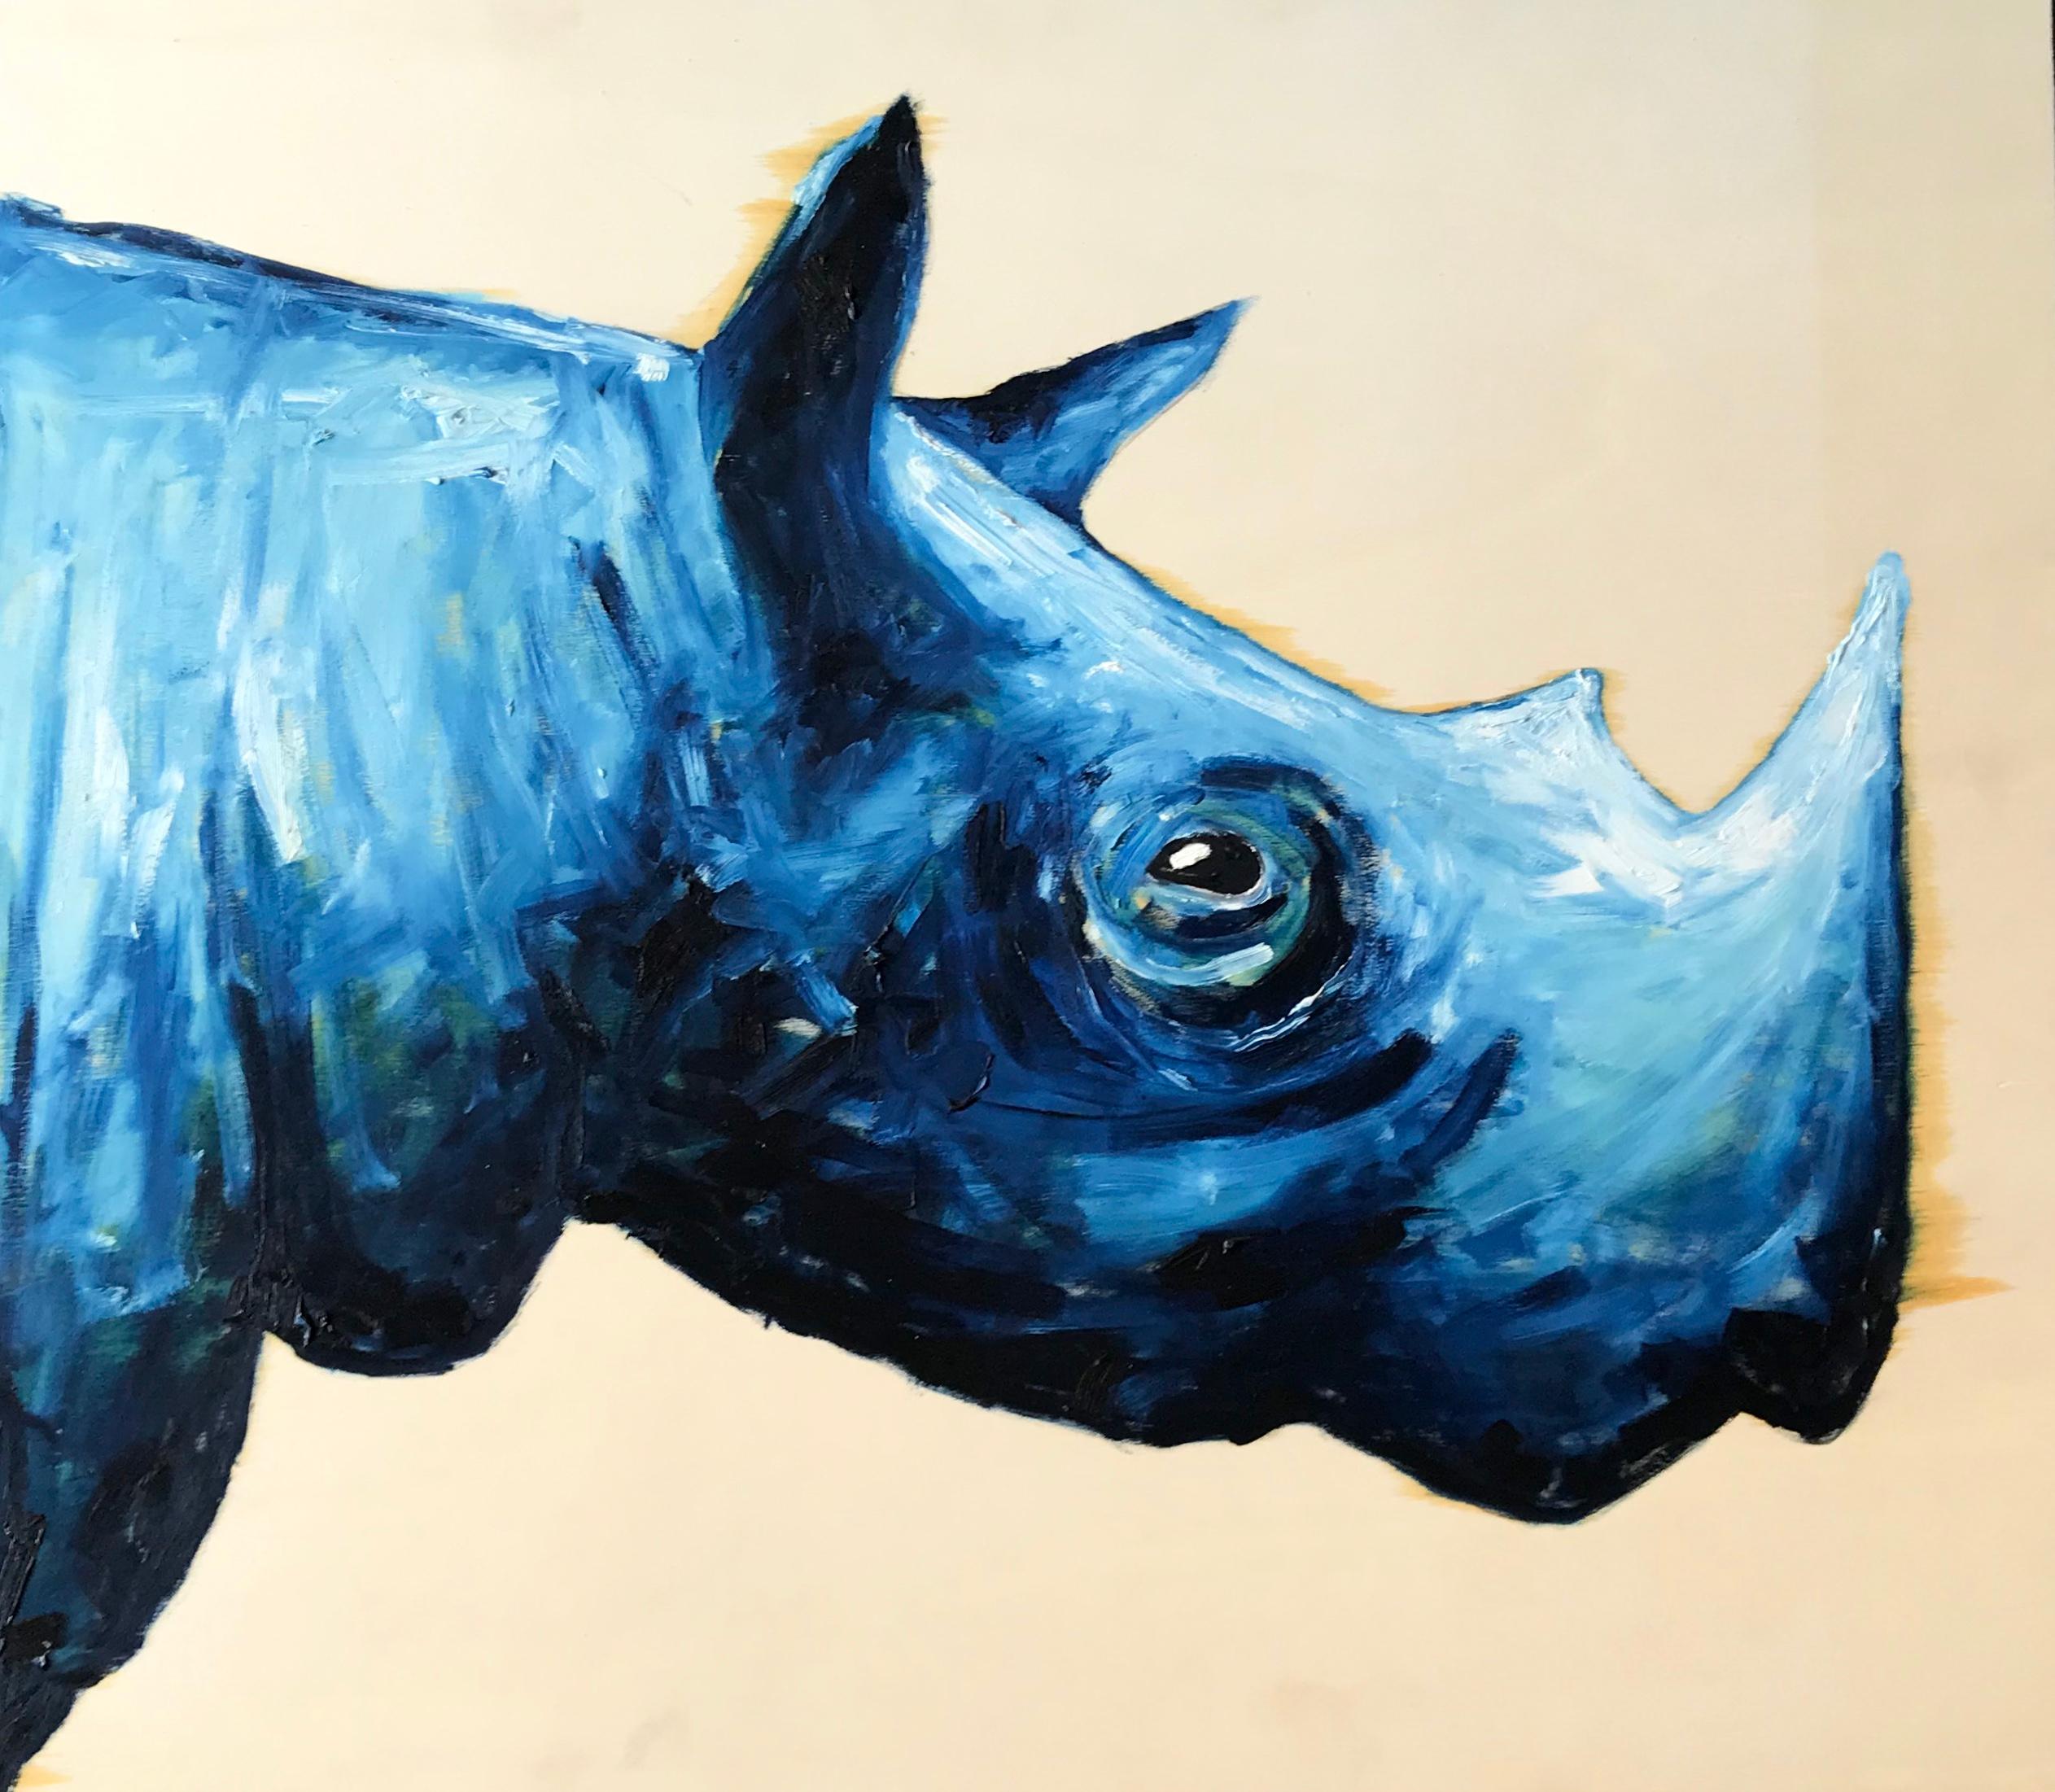 Blue rhinoceros. Contemporary acrylic painting of a simpatico rhino on raw wood panel. Unsigned. Italy, 2019.
Dimensions: 22